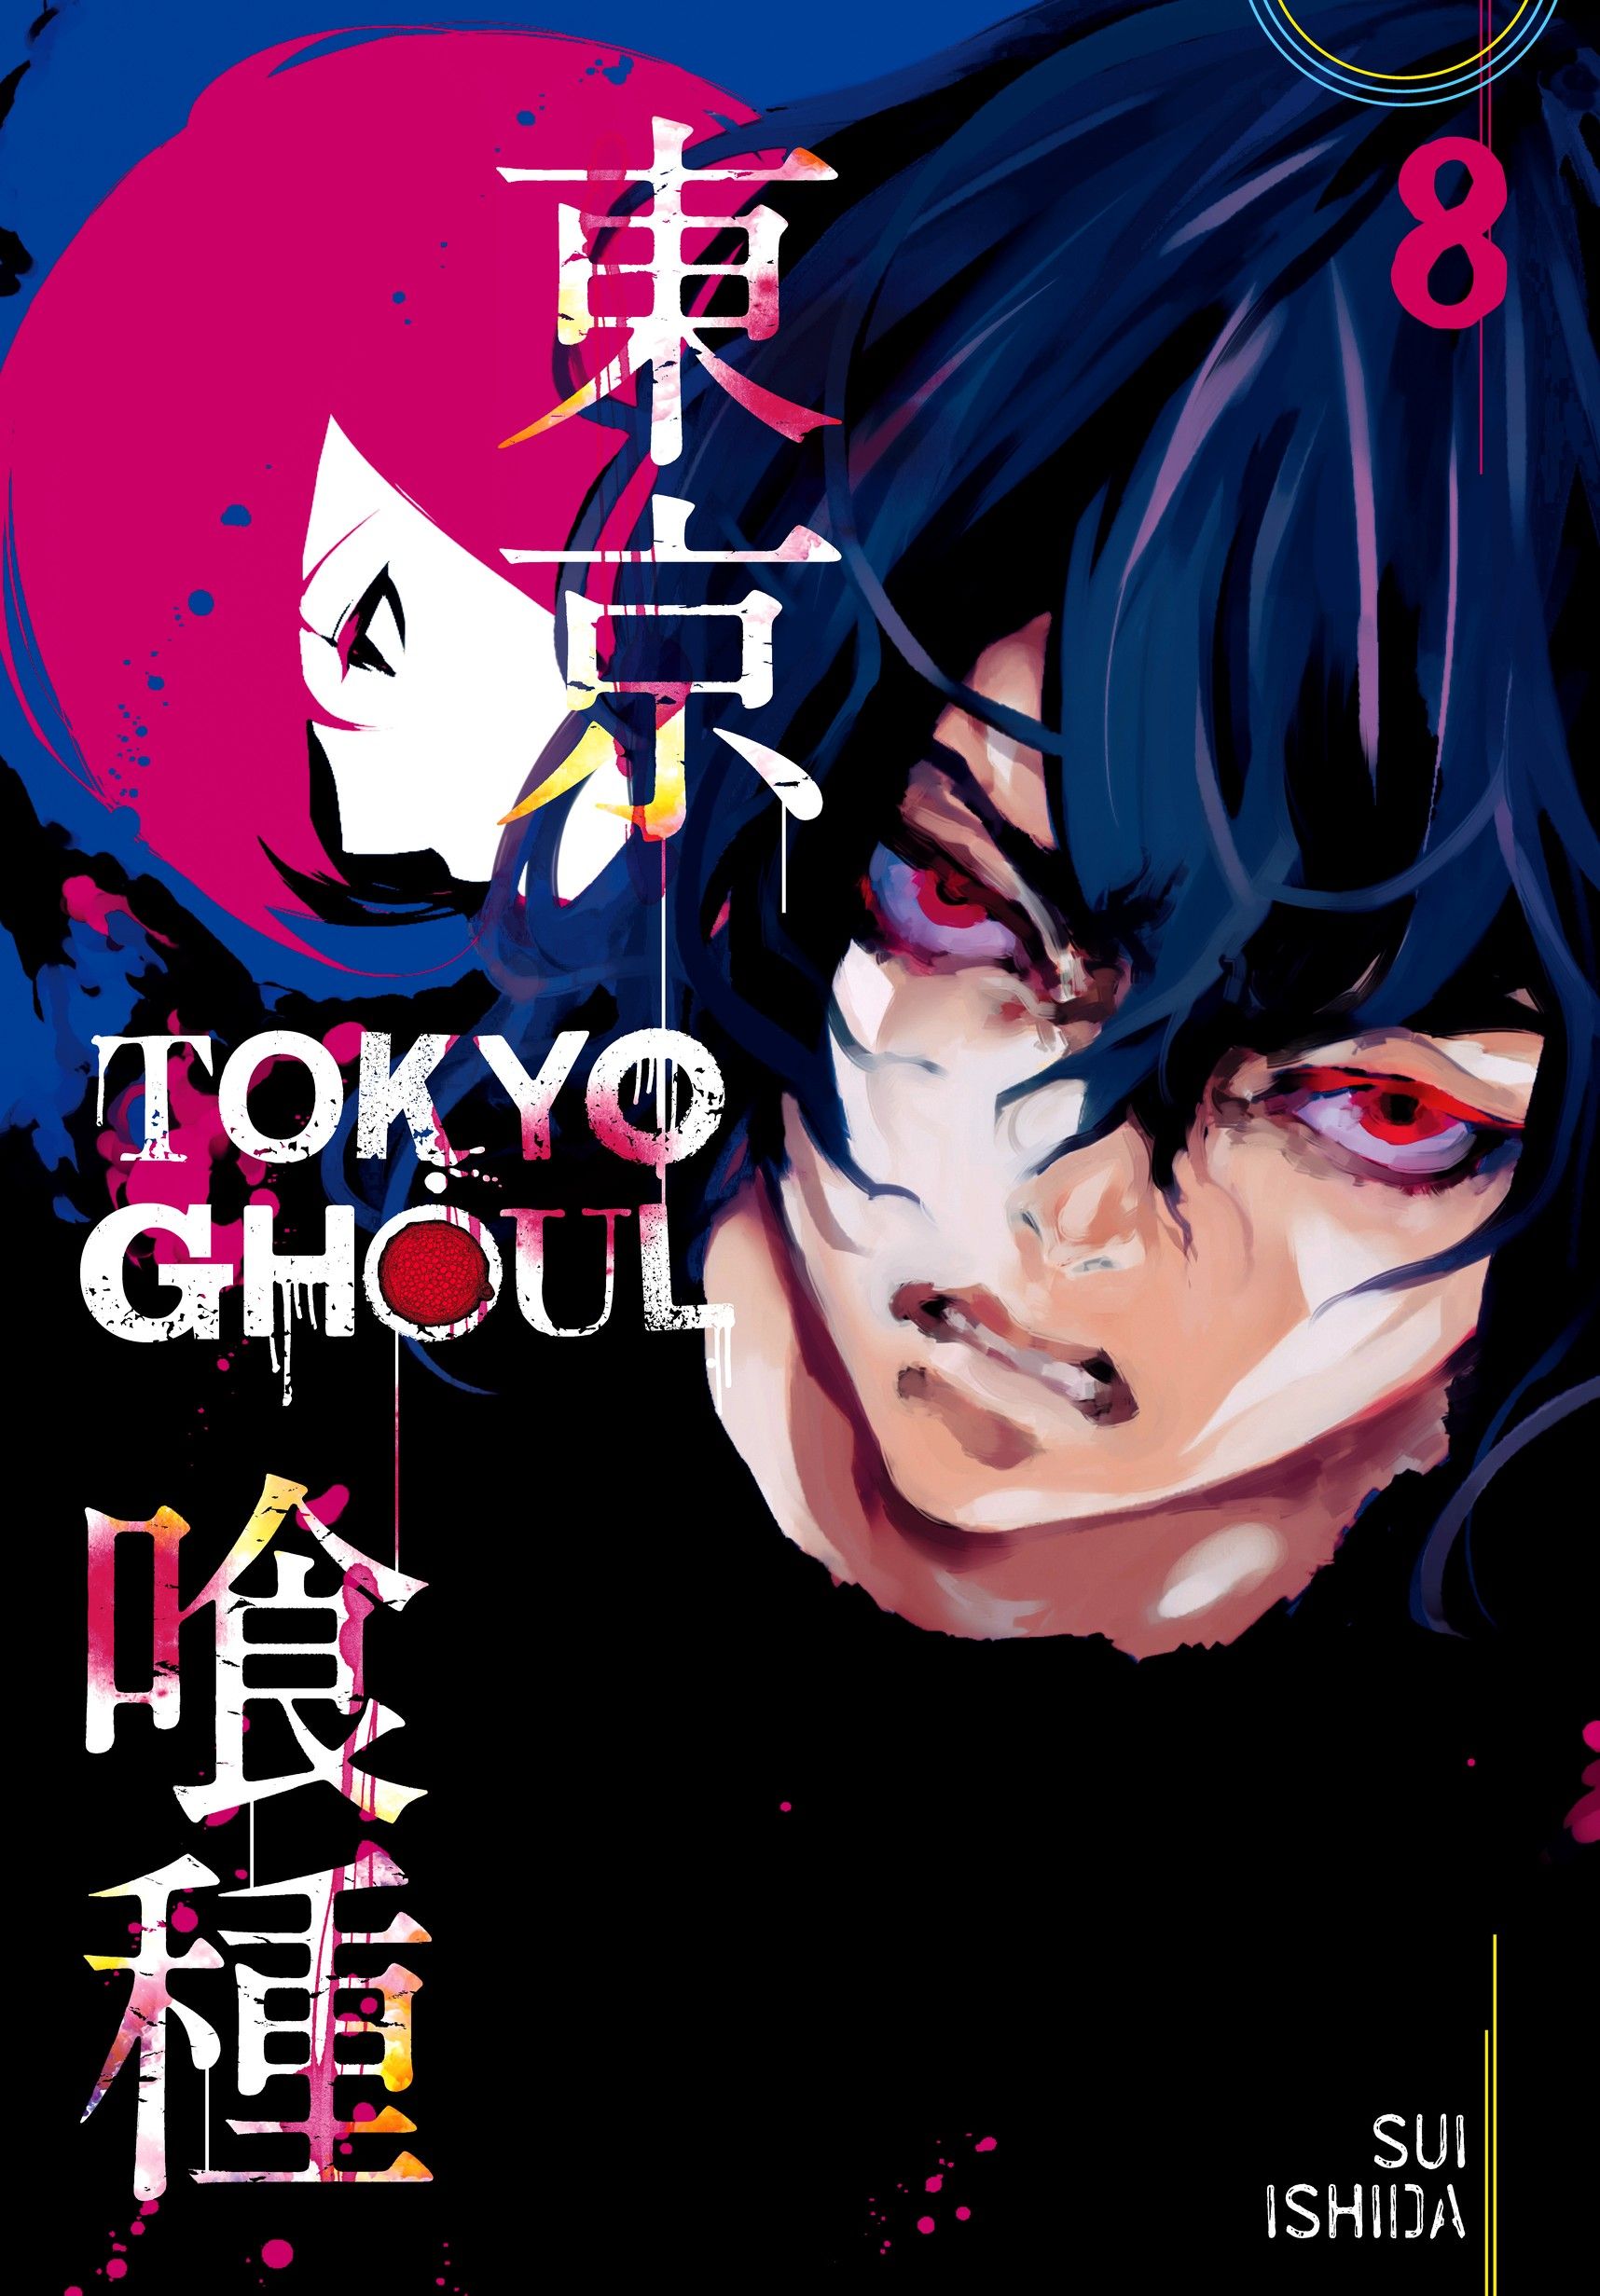 Tokyo Ghoul volume cover 8 featuring Touka and Ayato